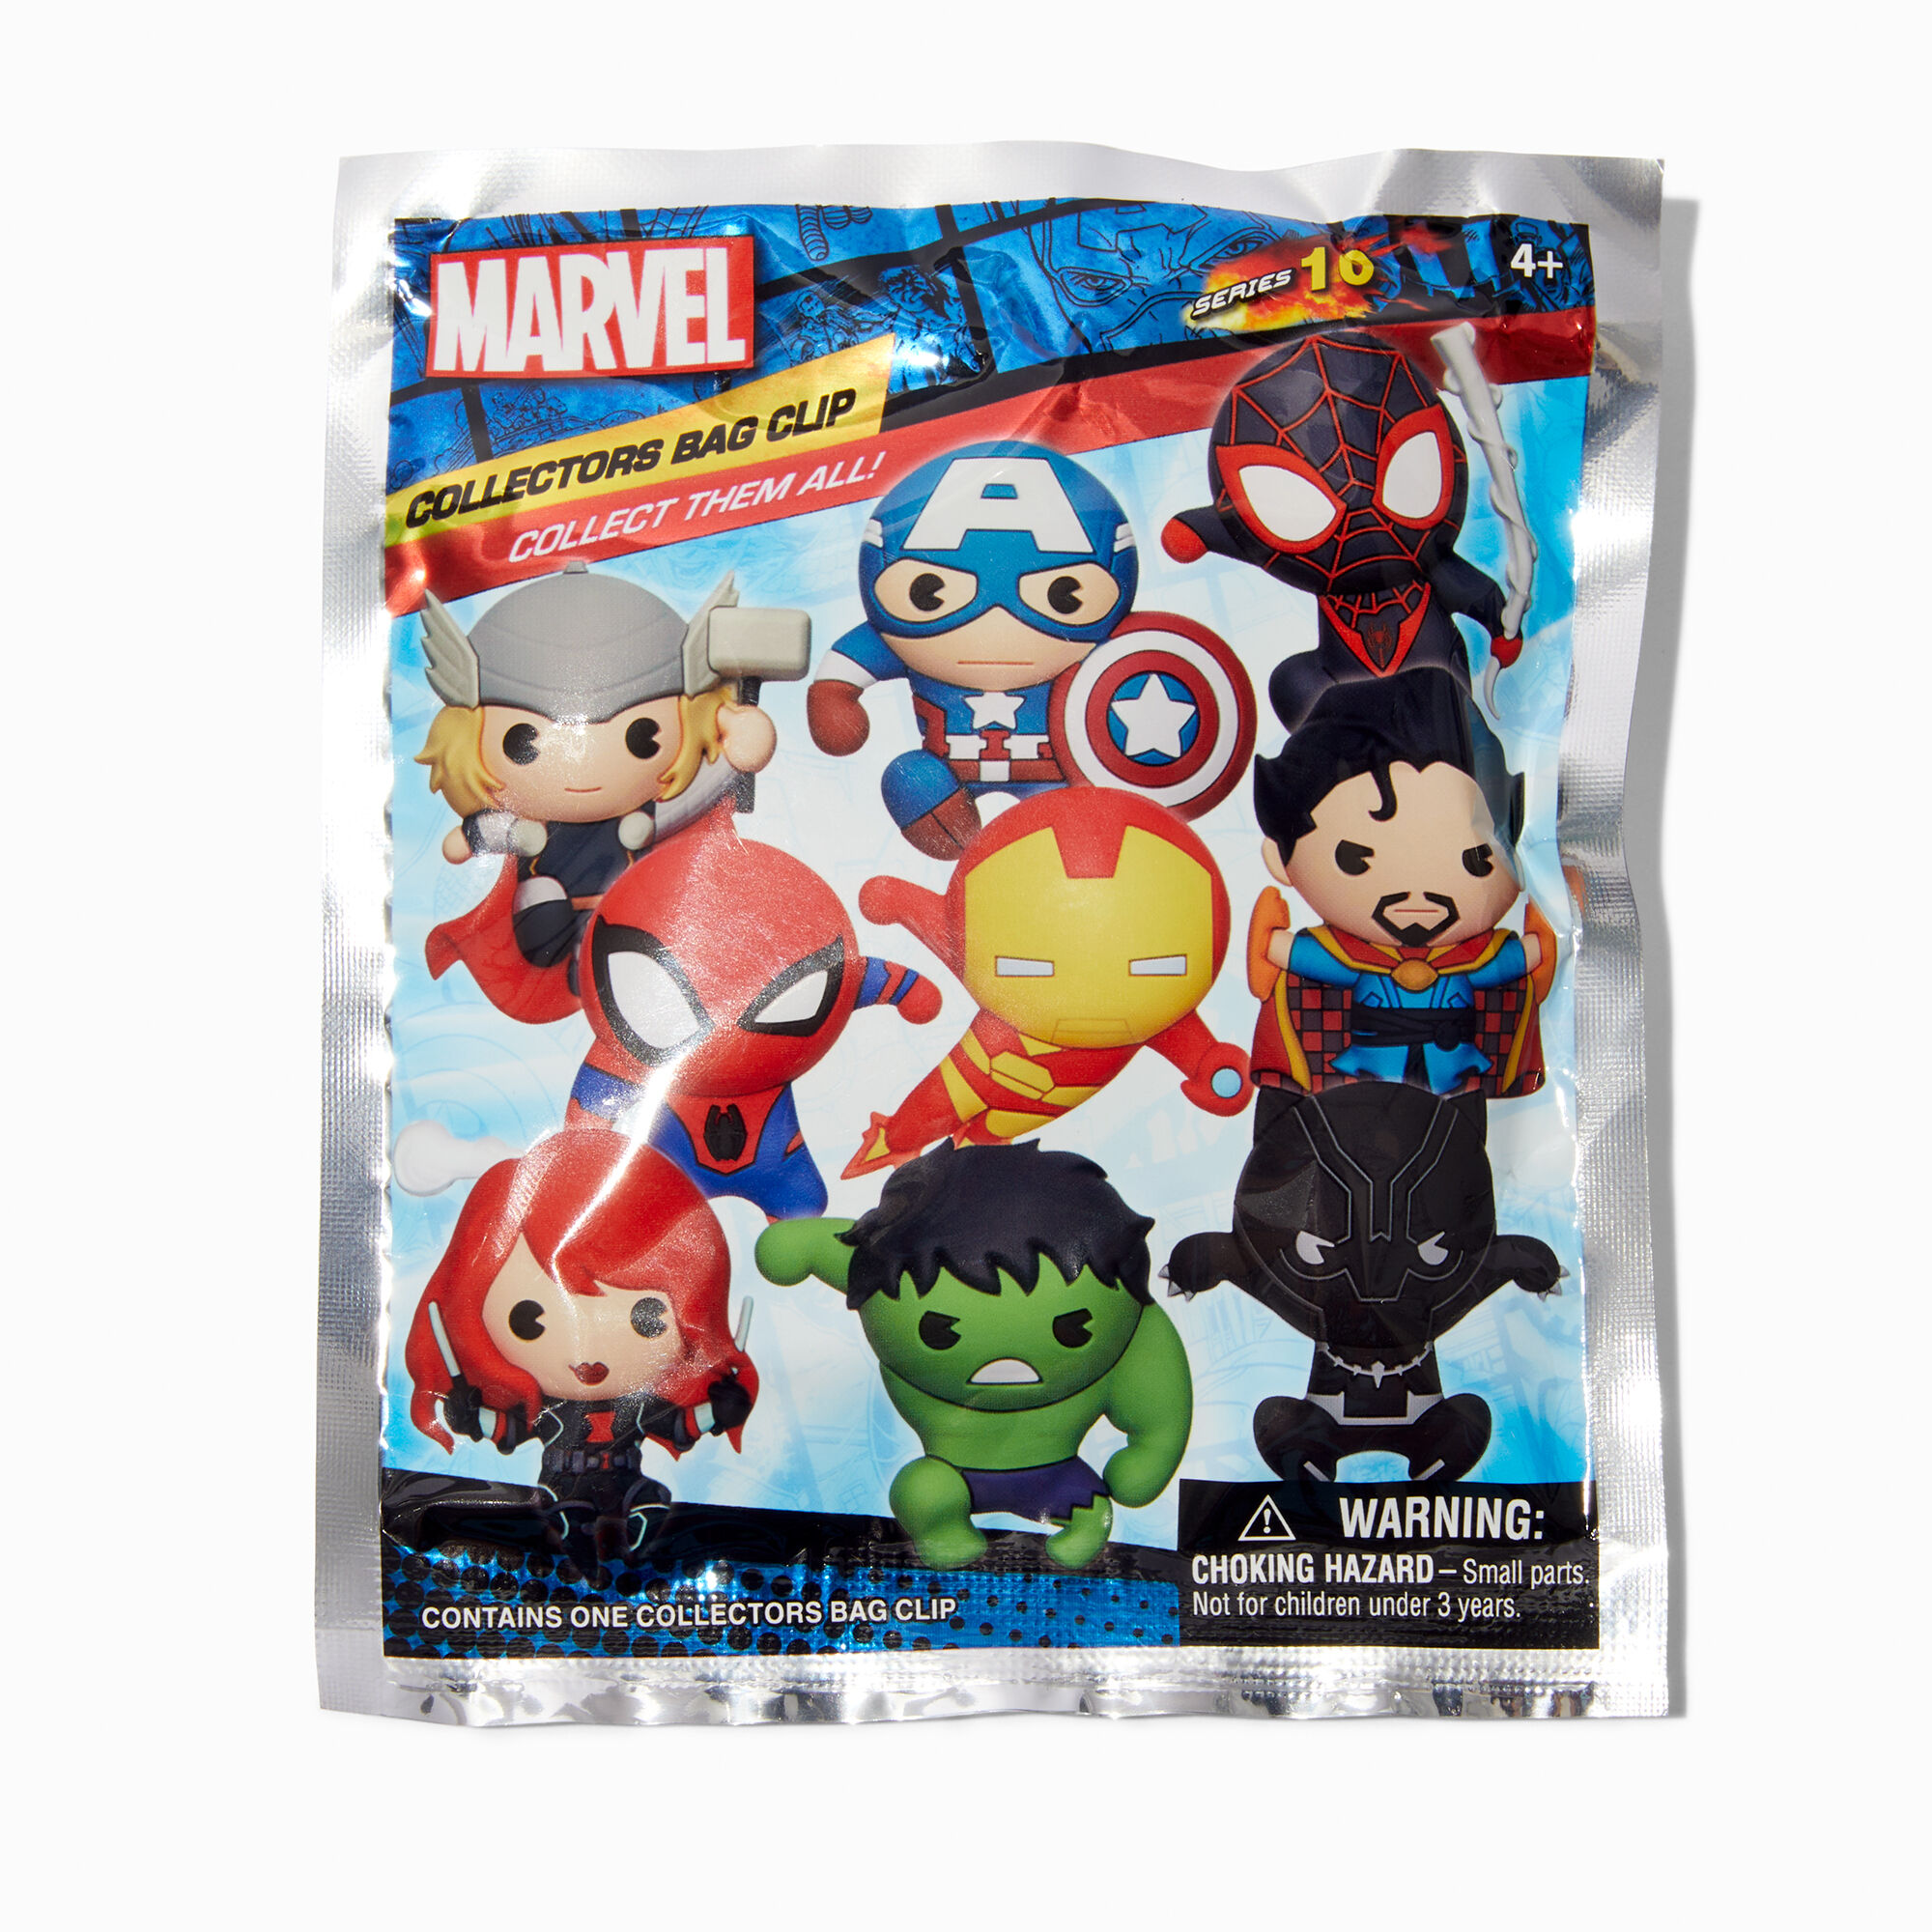 View Claires Marvel Series 10 Collectors Bag Clip Blind Styles Vary information